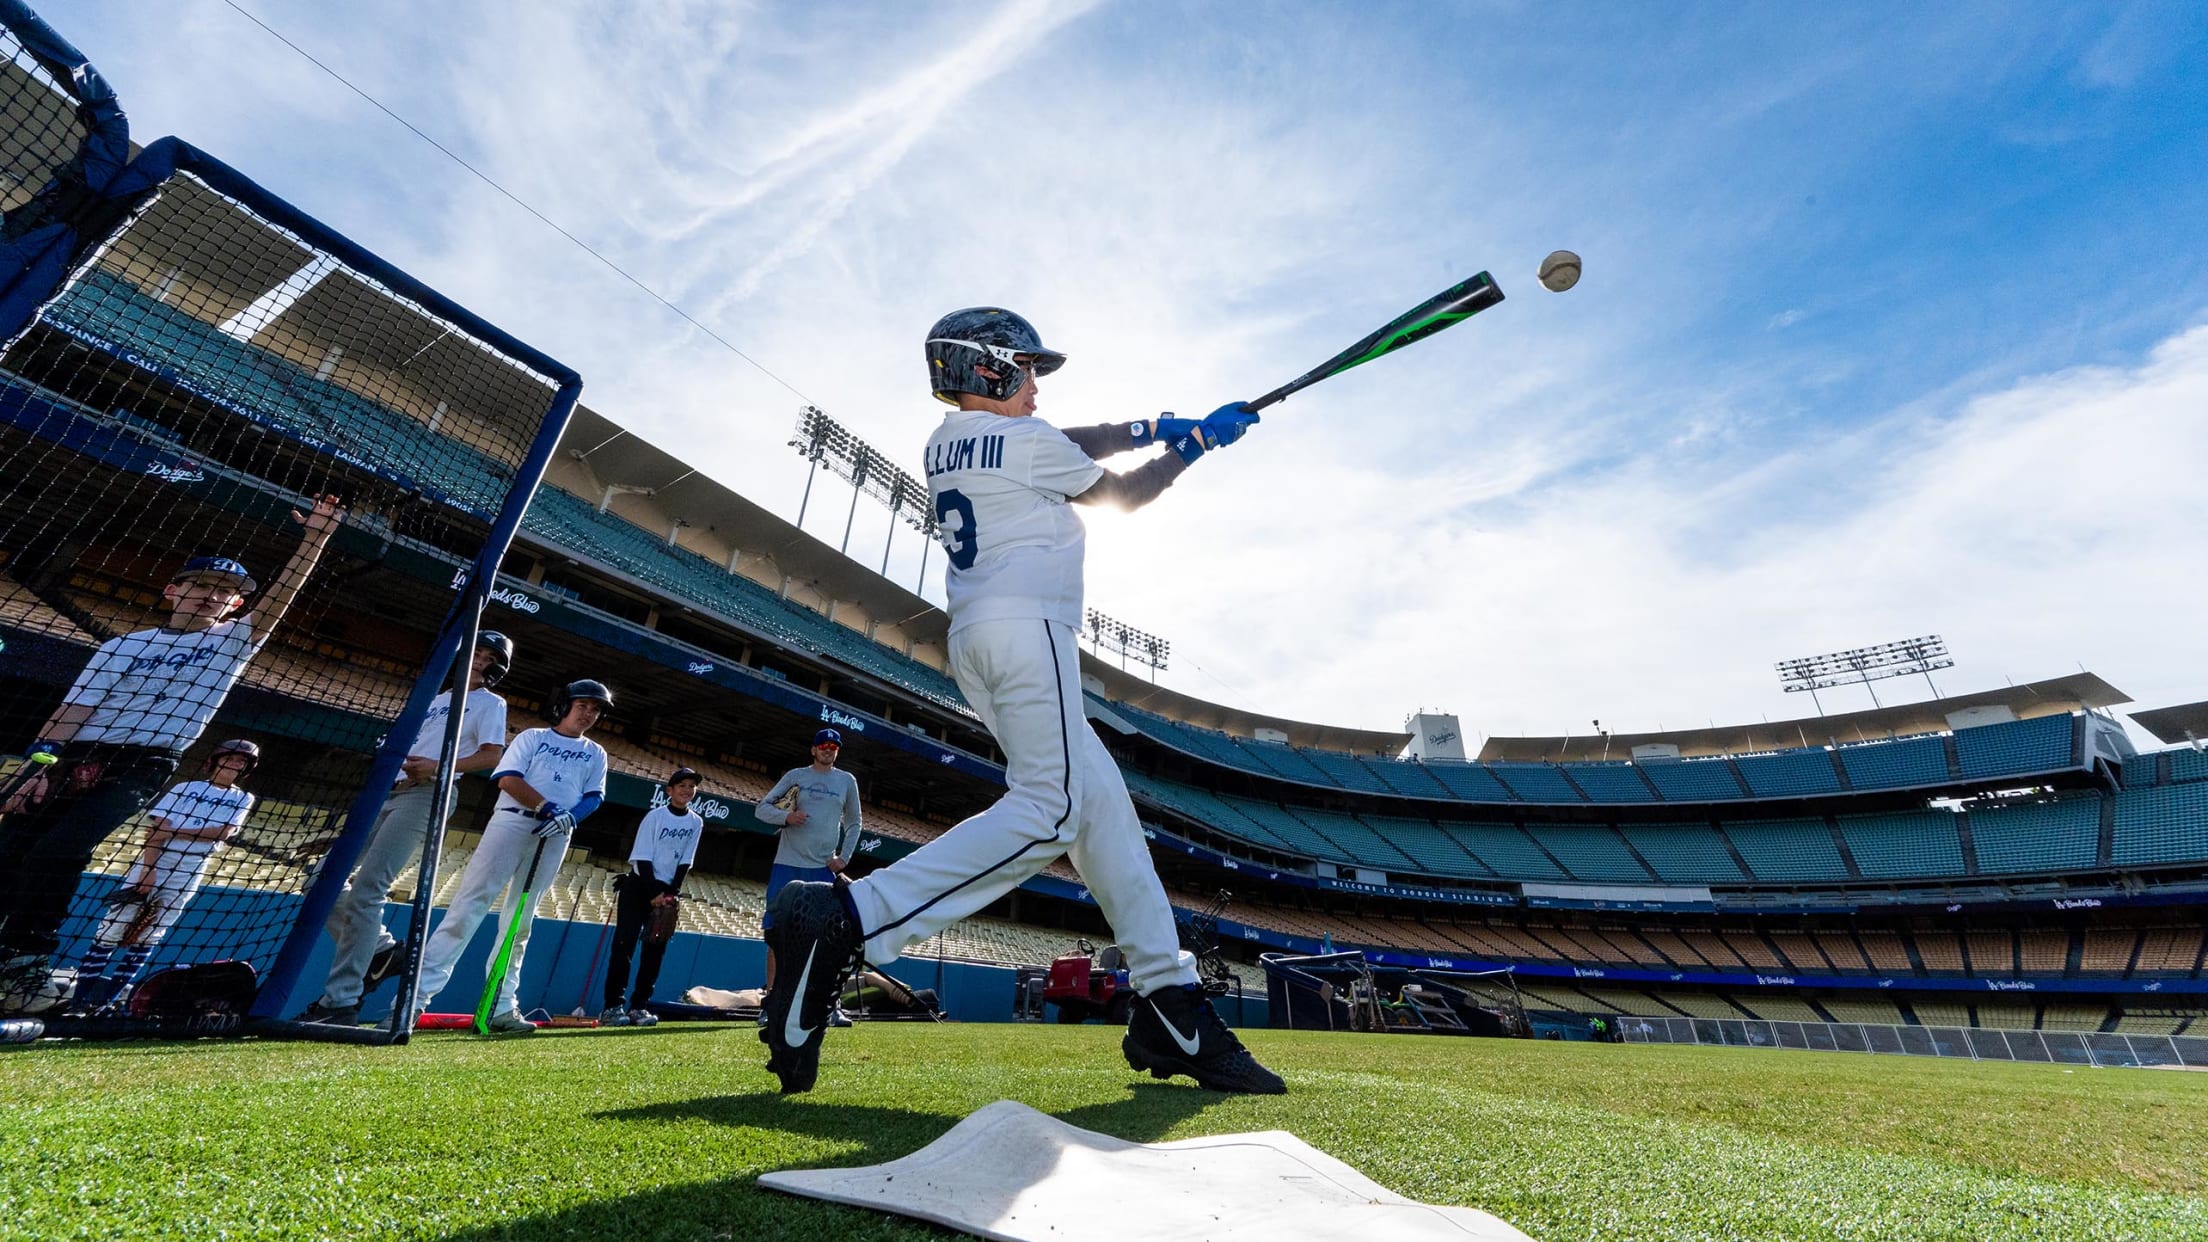 Youth Camp Series  Los Angeles Dodgers